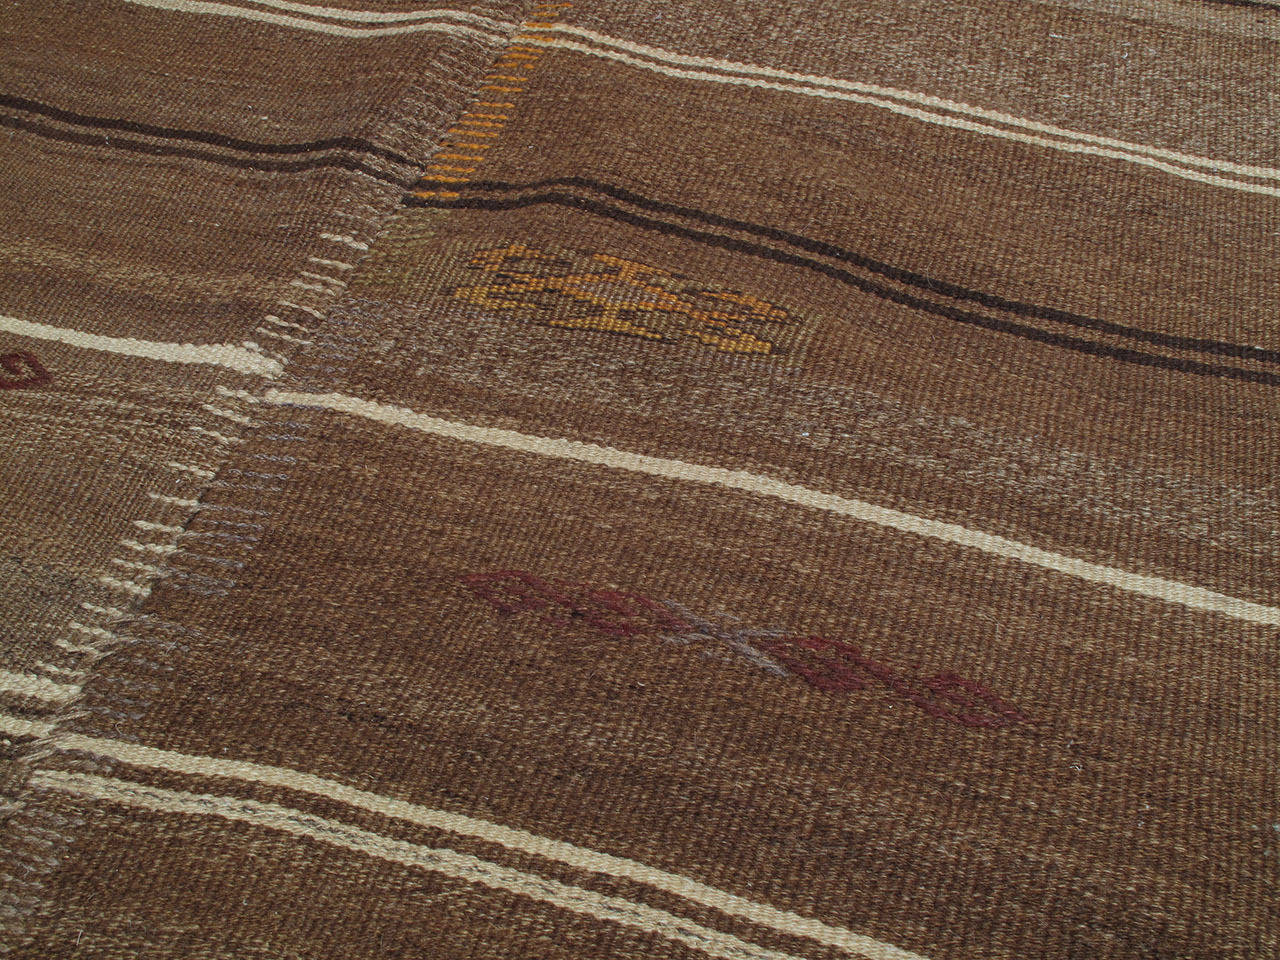 Hand-Woven Banded Kilim in Two Panels